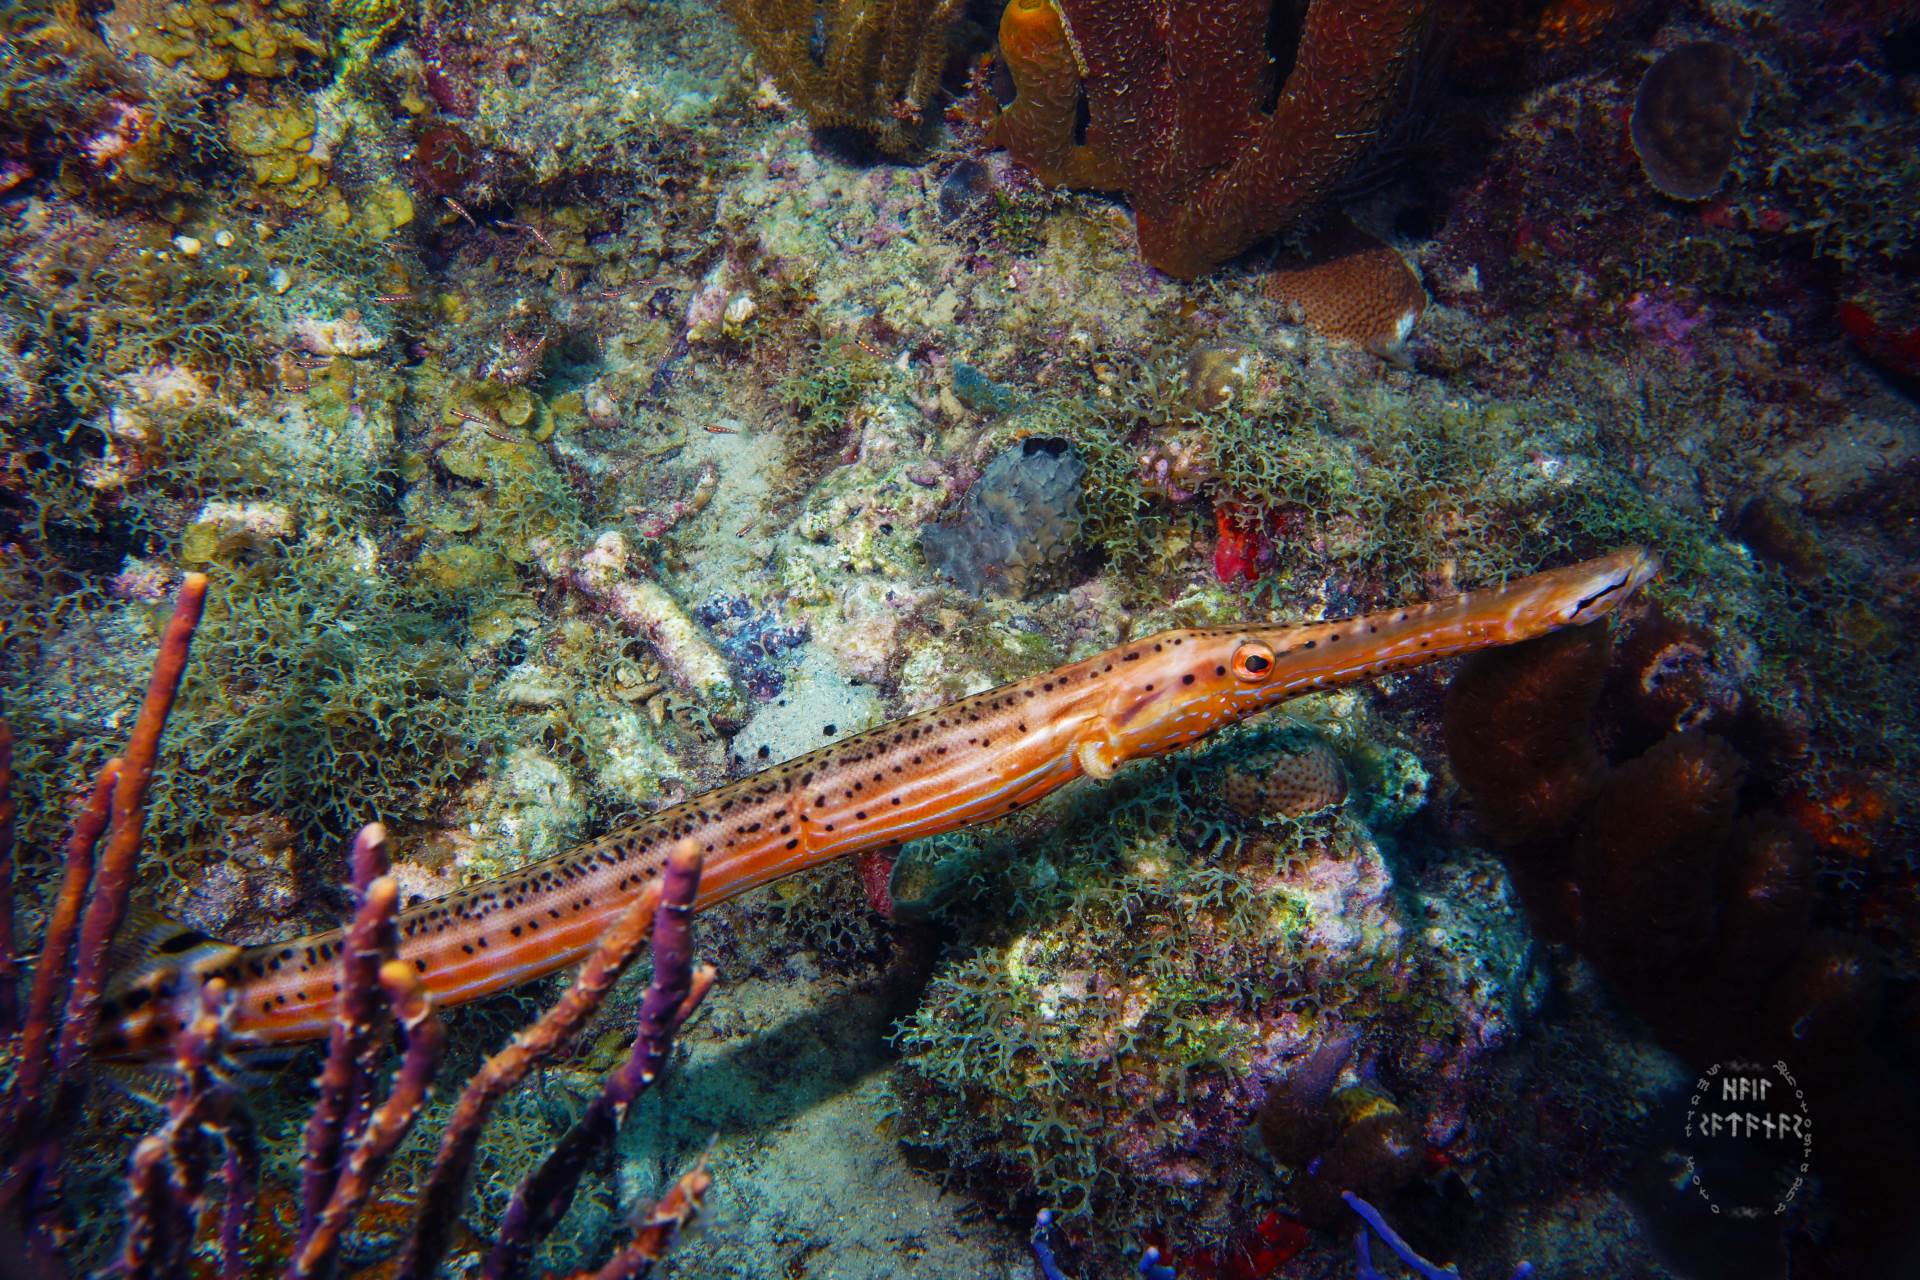 I always love seeing trumpetfish while diving!